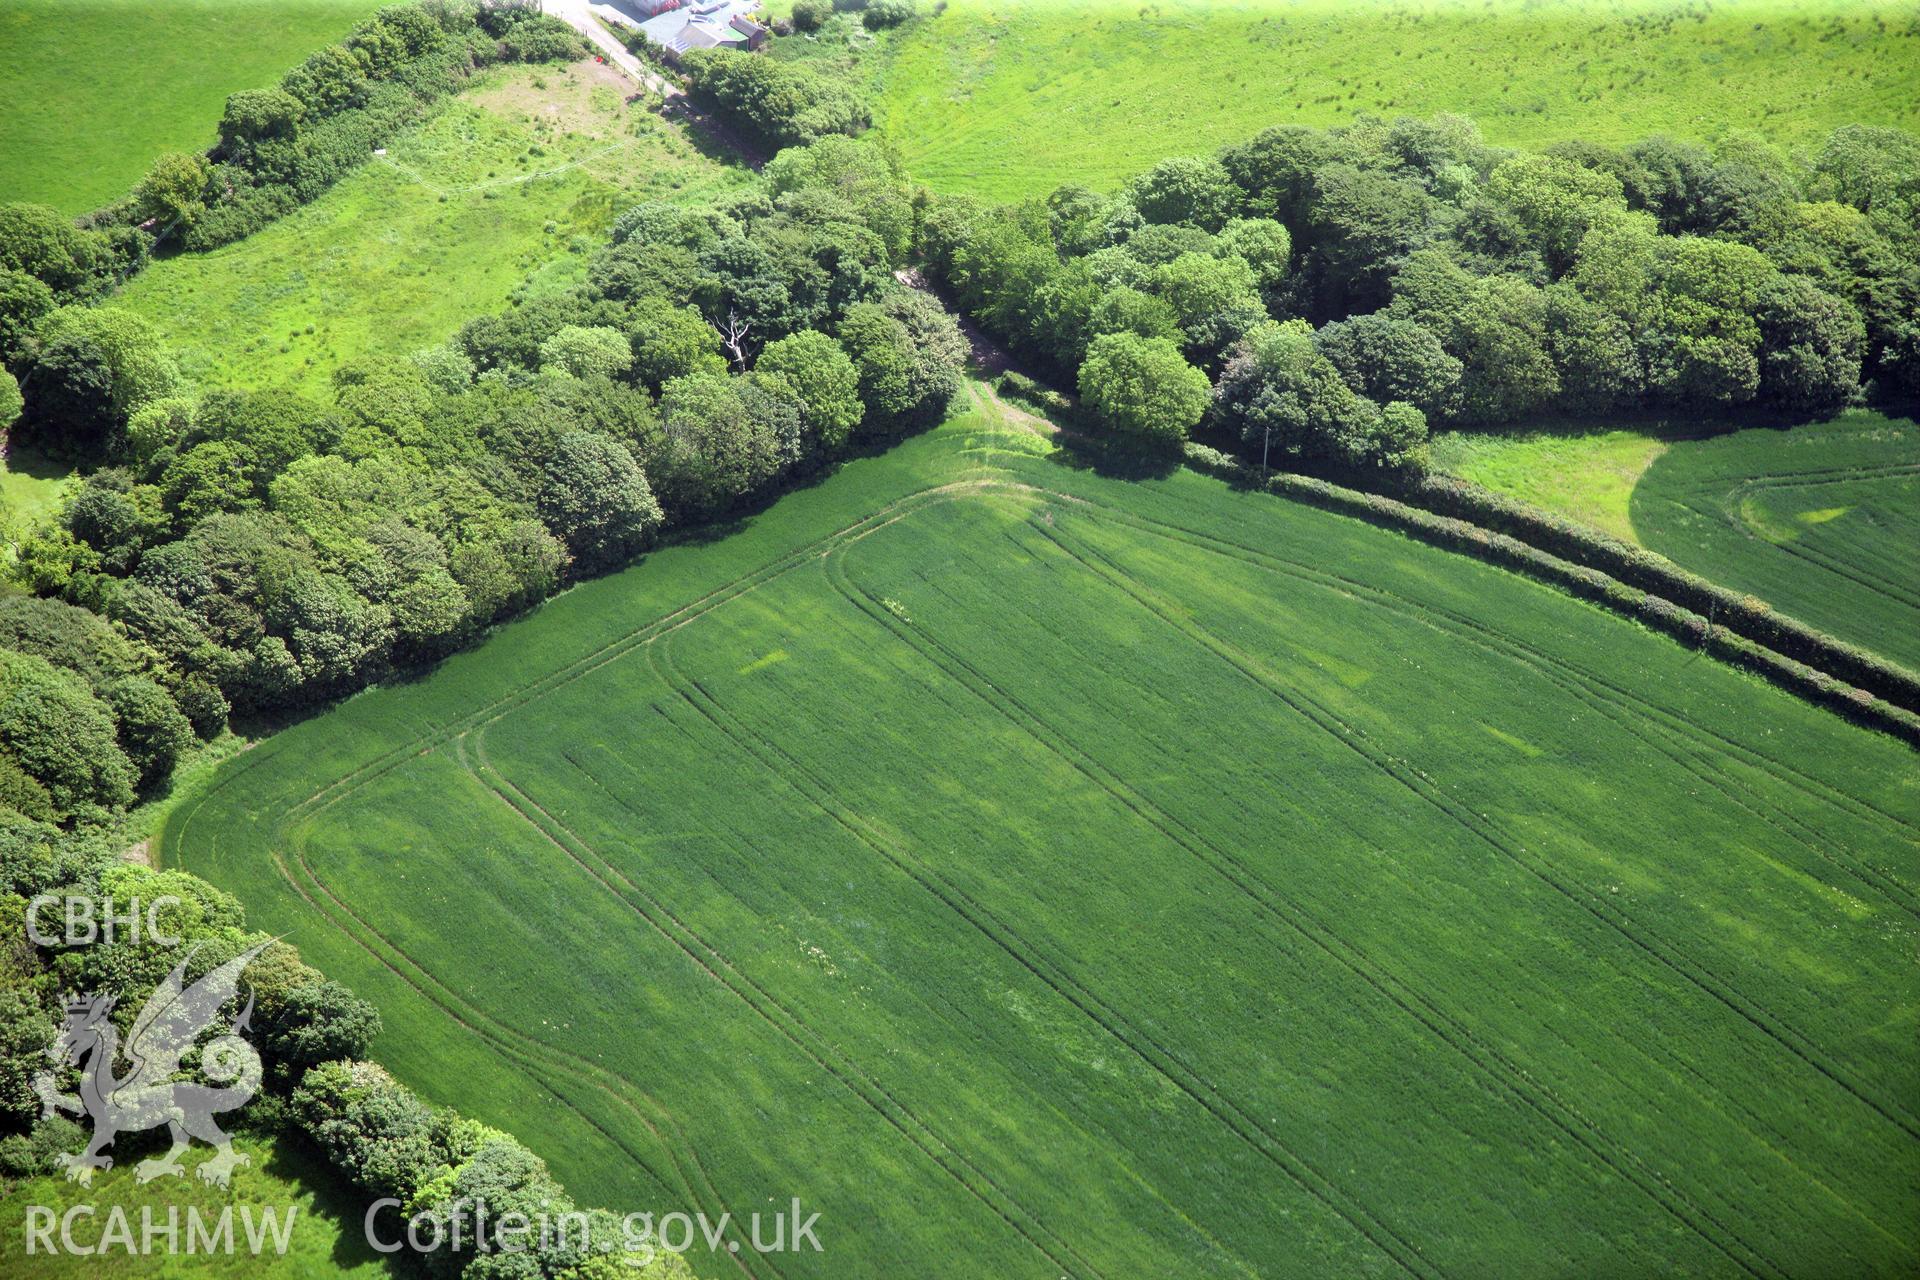 RCAHMW colour oblique photograph of Cropmarks east of Butterhill Farm. Taken by Toby Driver on 24/05/2011.